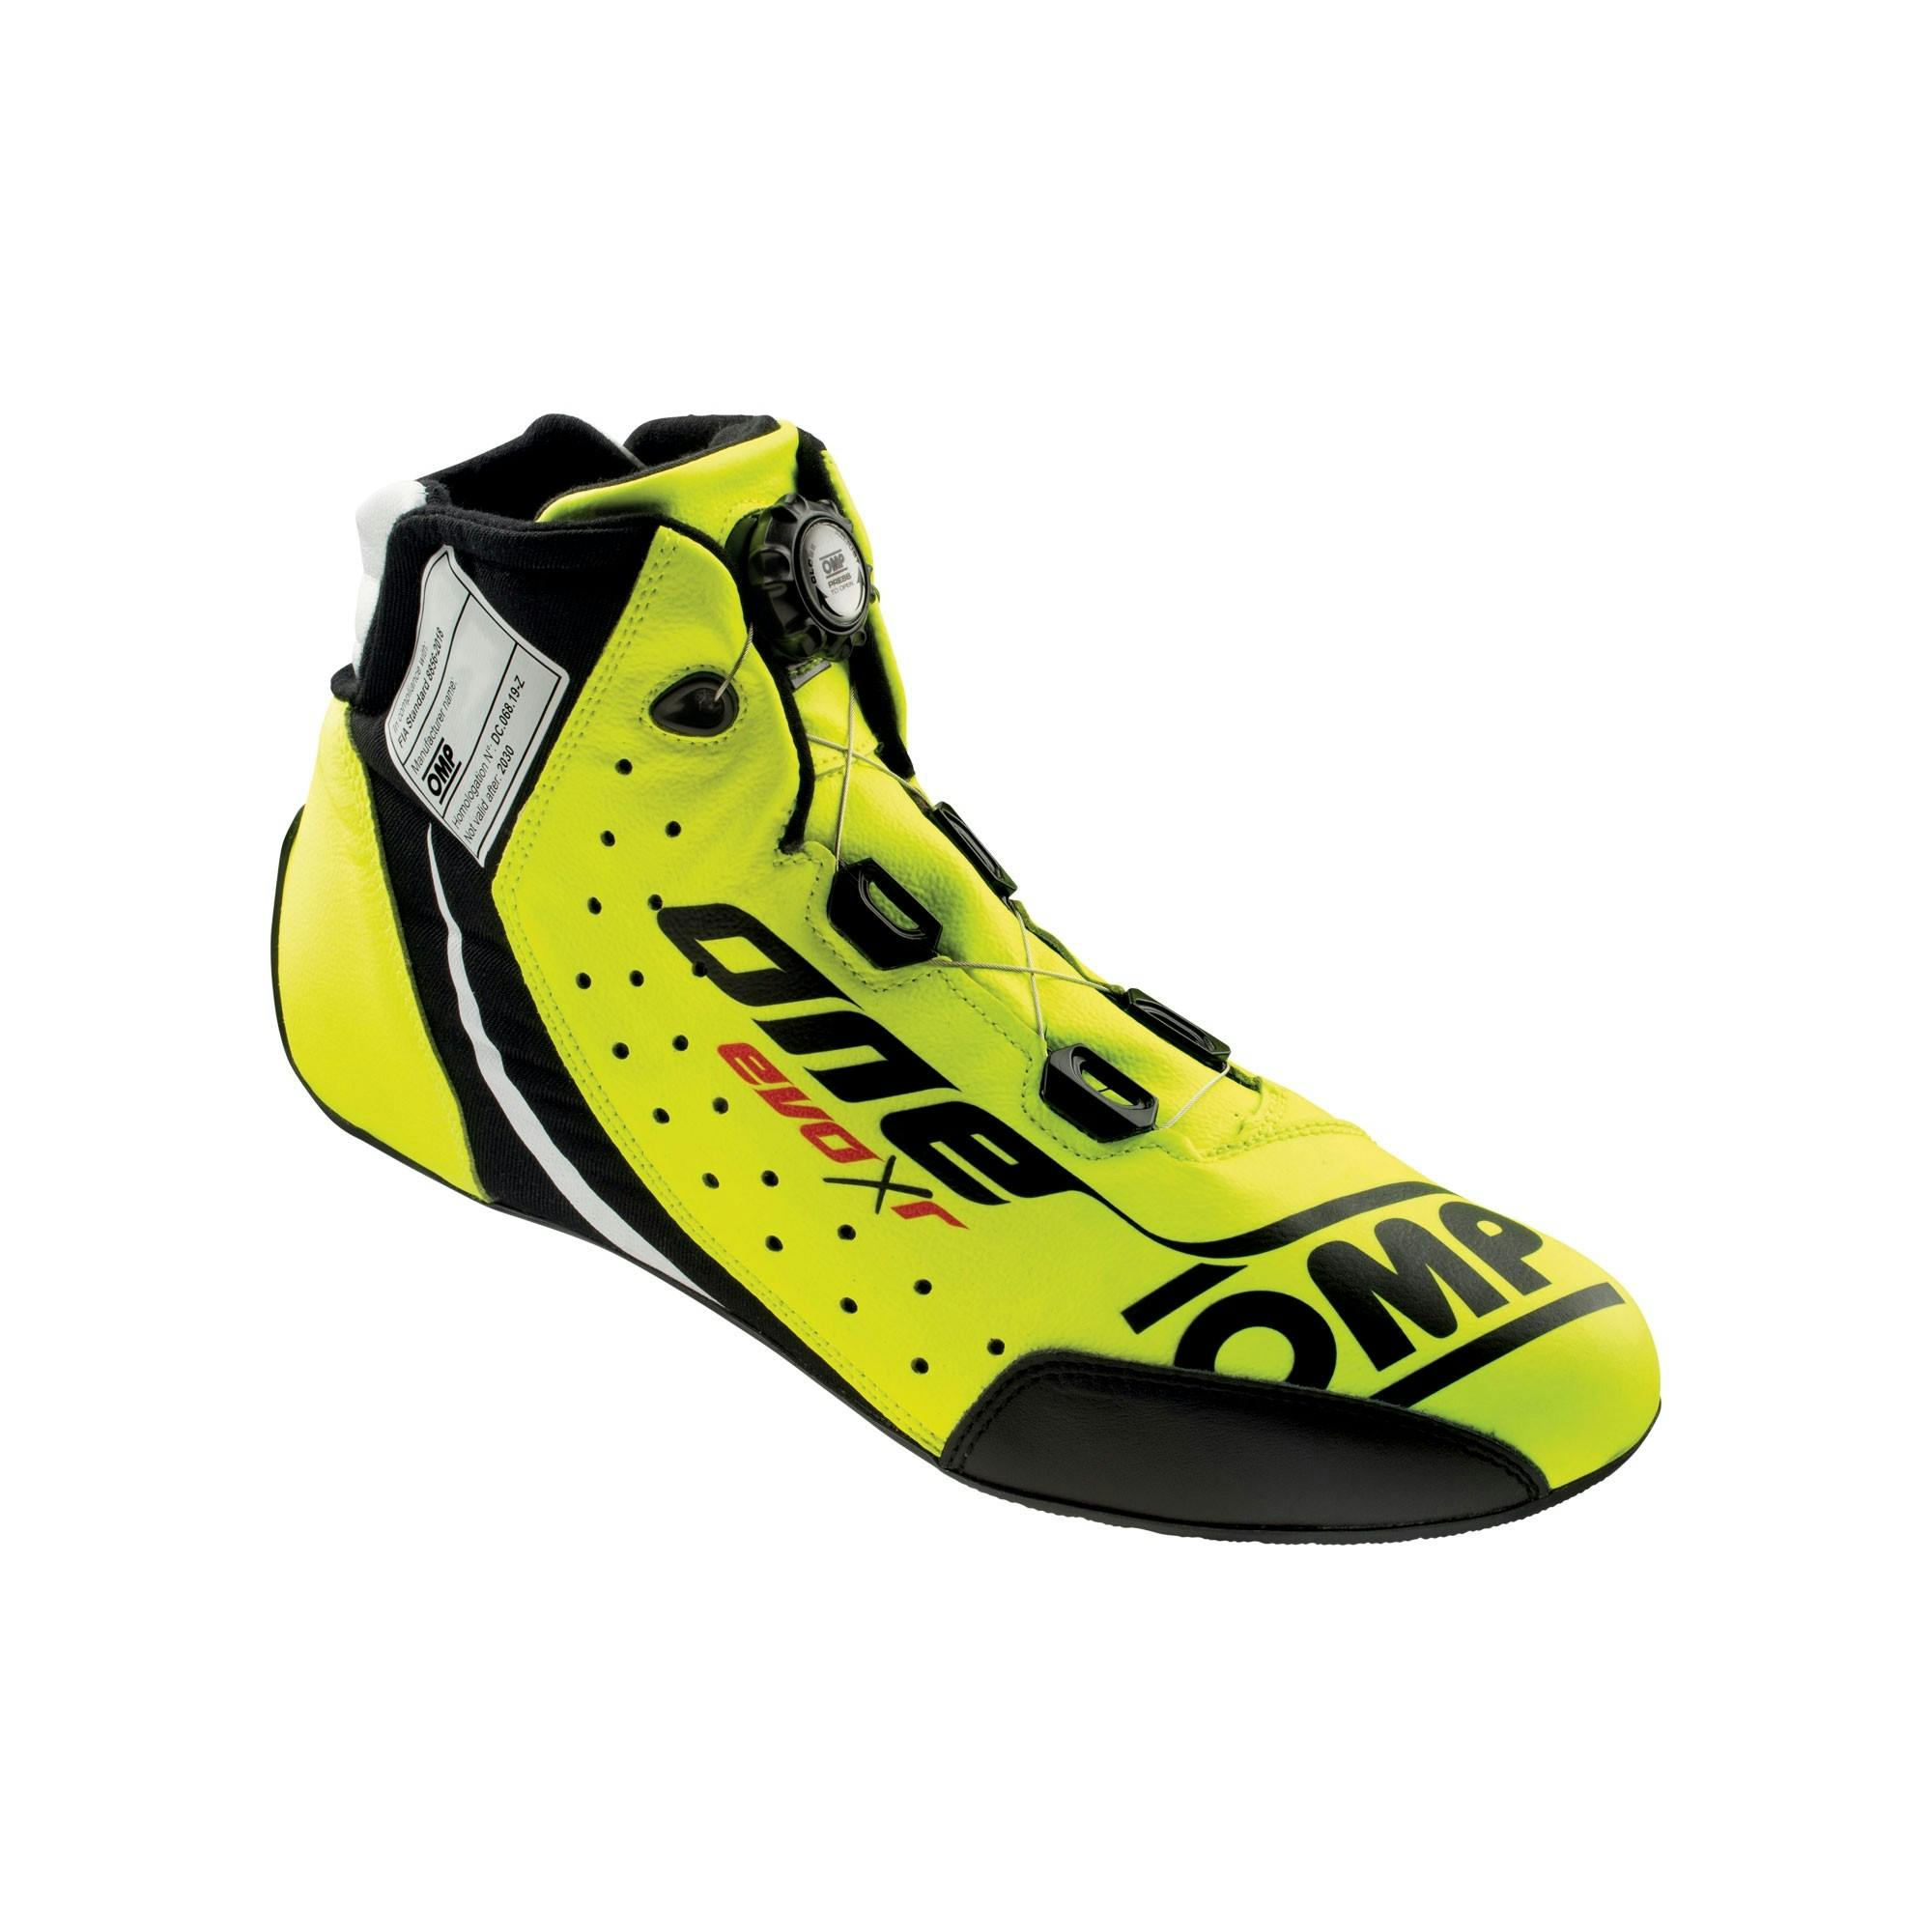 OMP Racing shoes driving racing